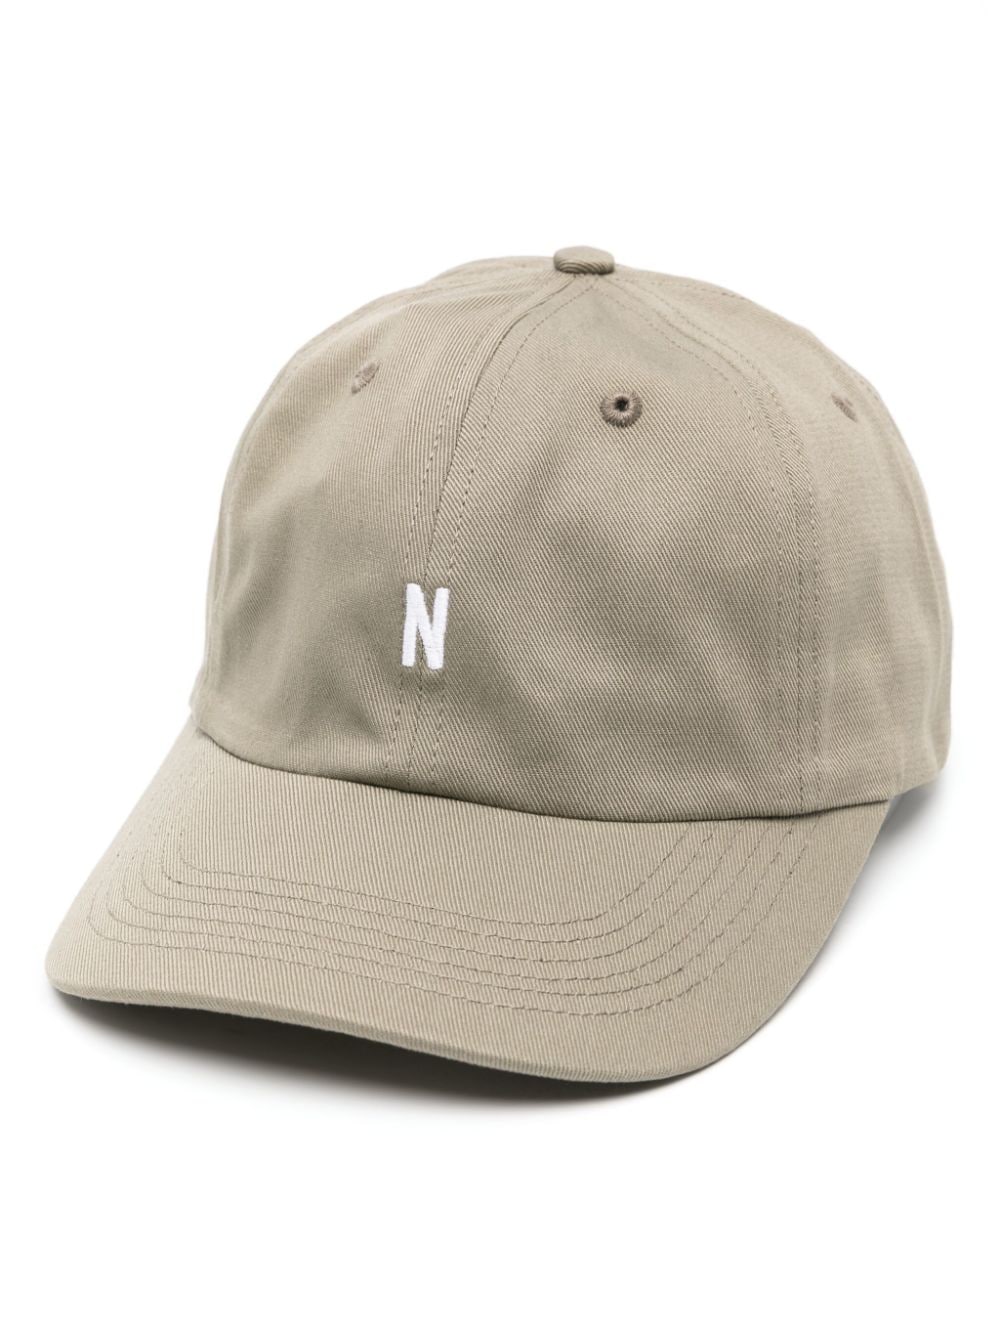 Norse Projects logo-embroidered baseball cap - Green von Norse Projects